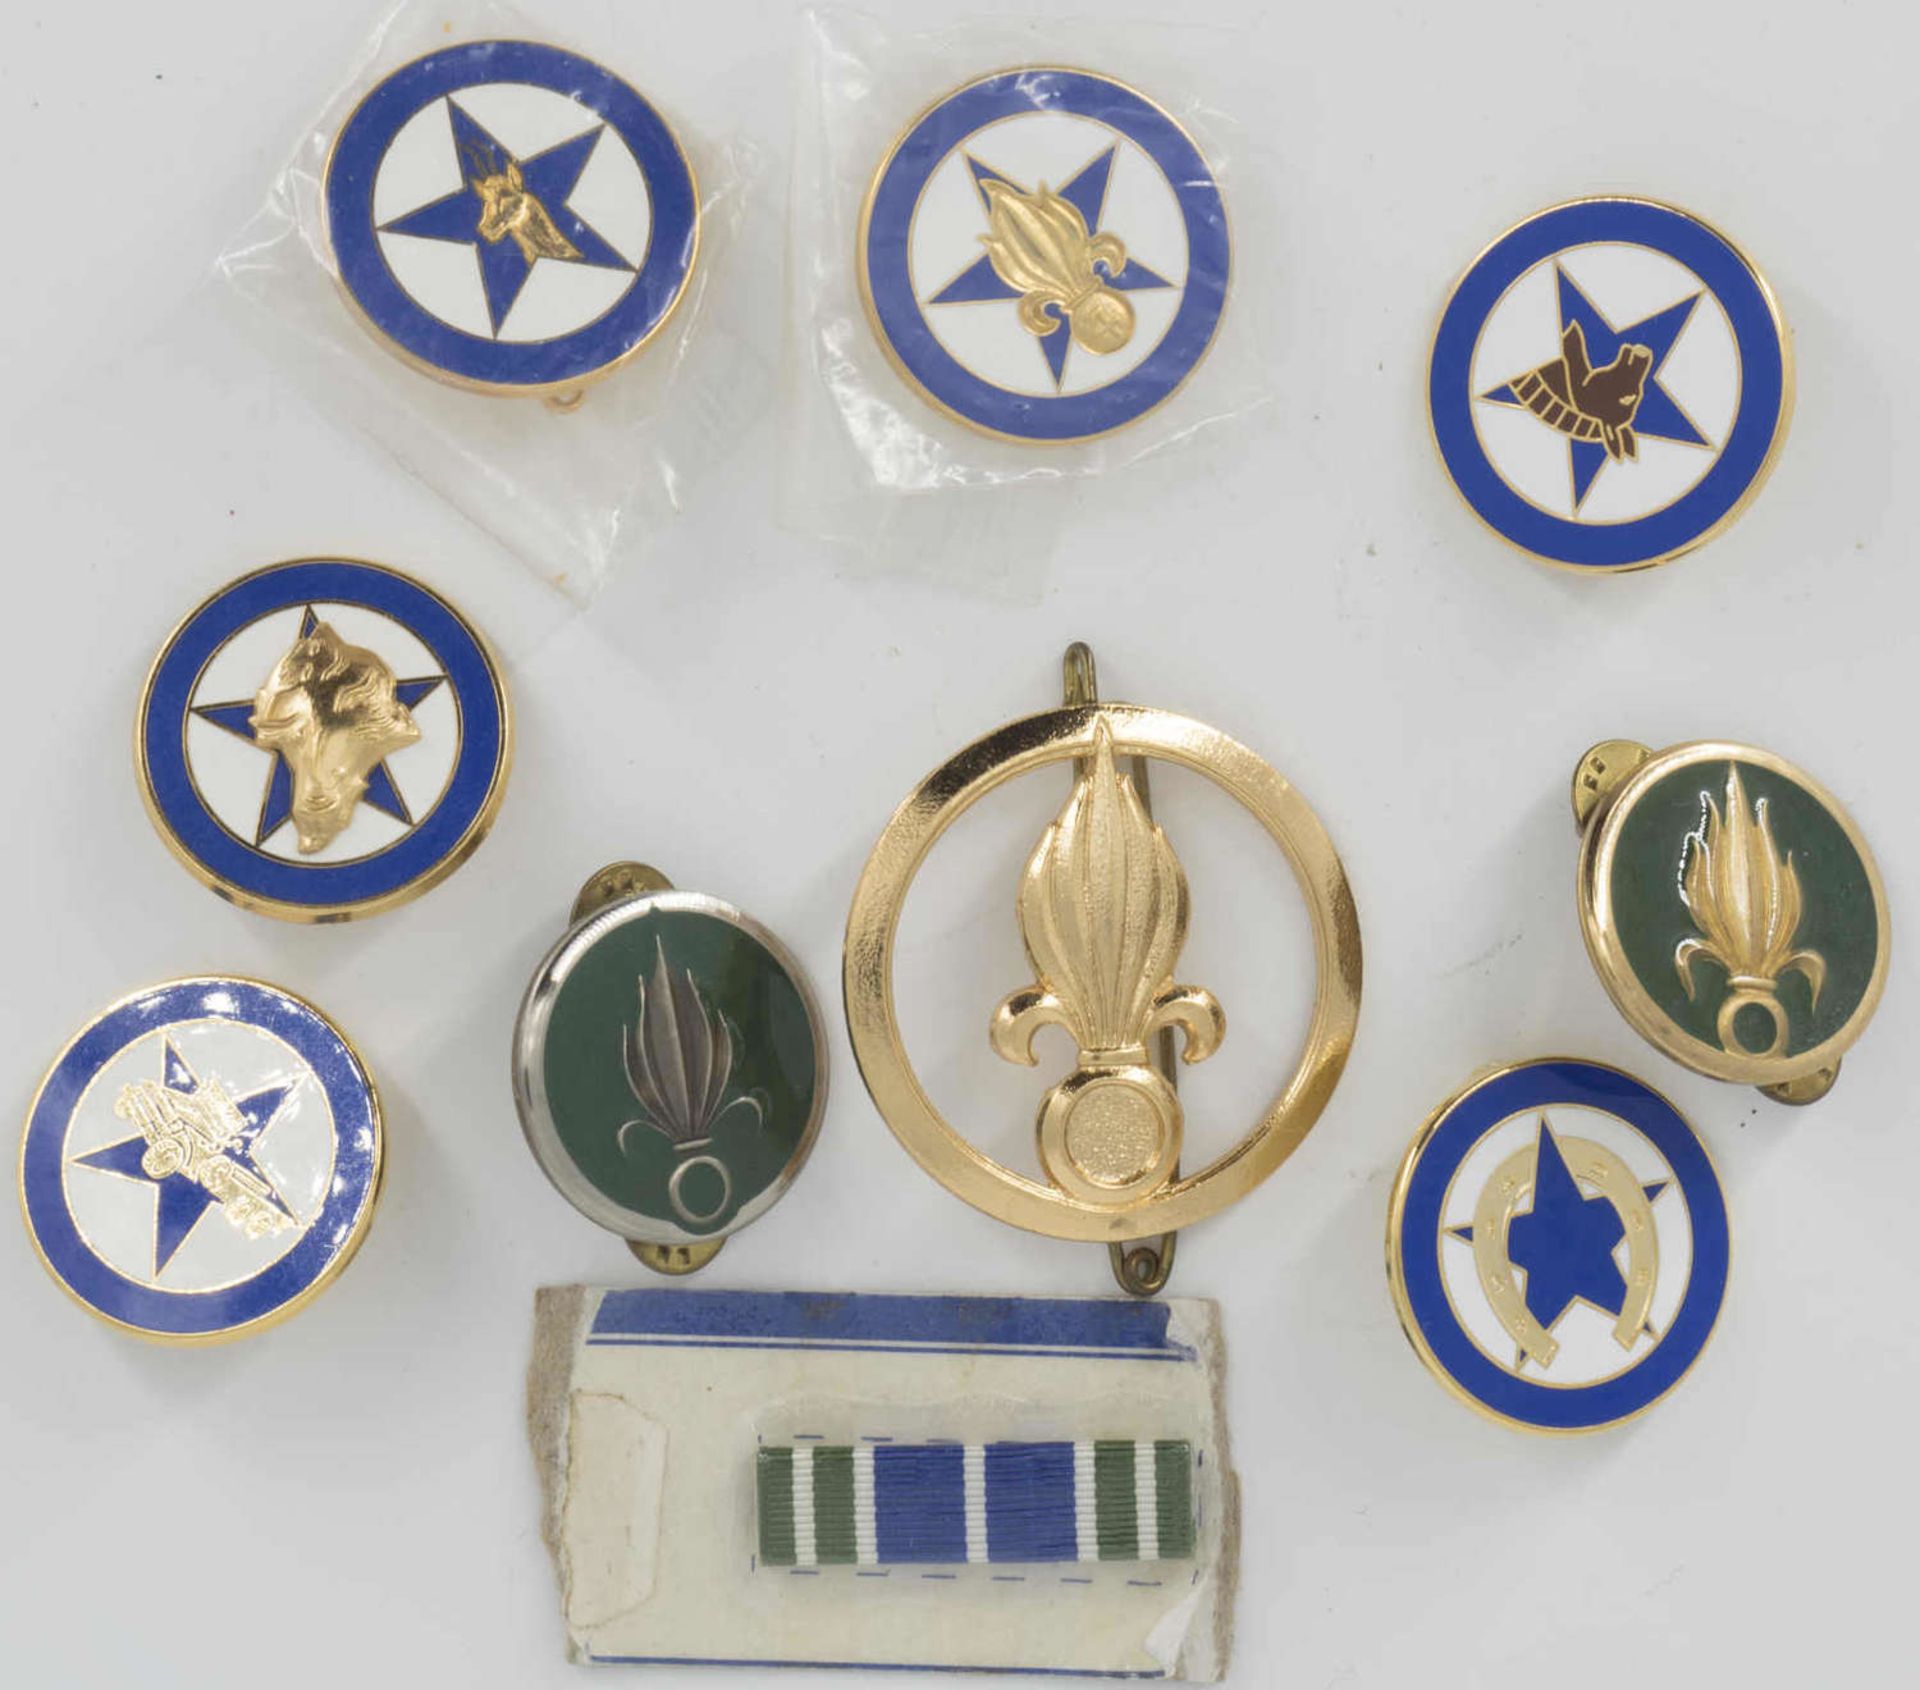 Lot of badges / pins of the French Foreign Legion. Please visit.